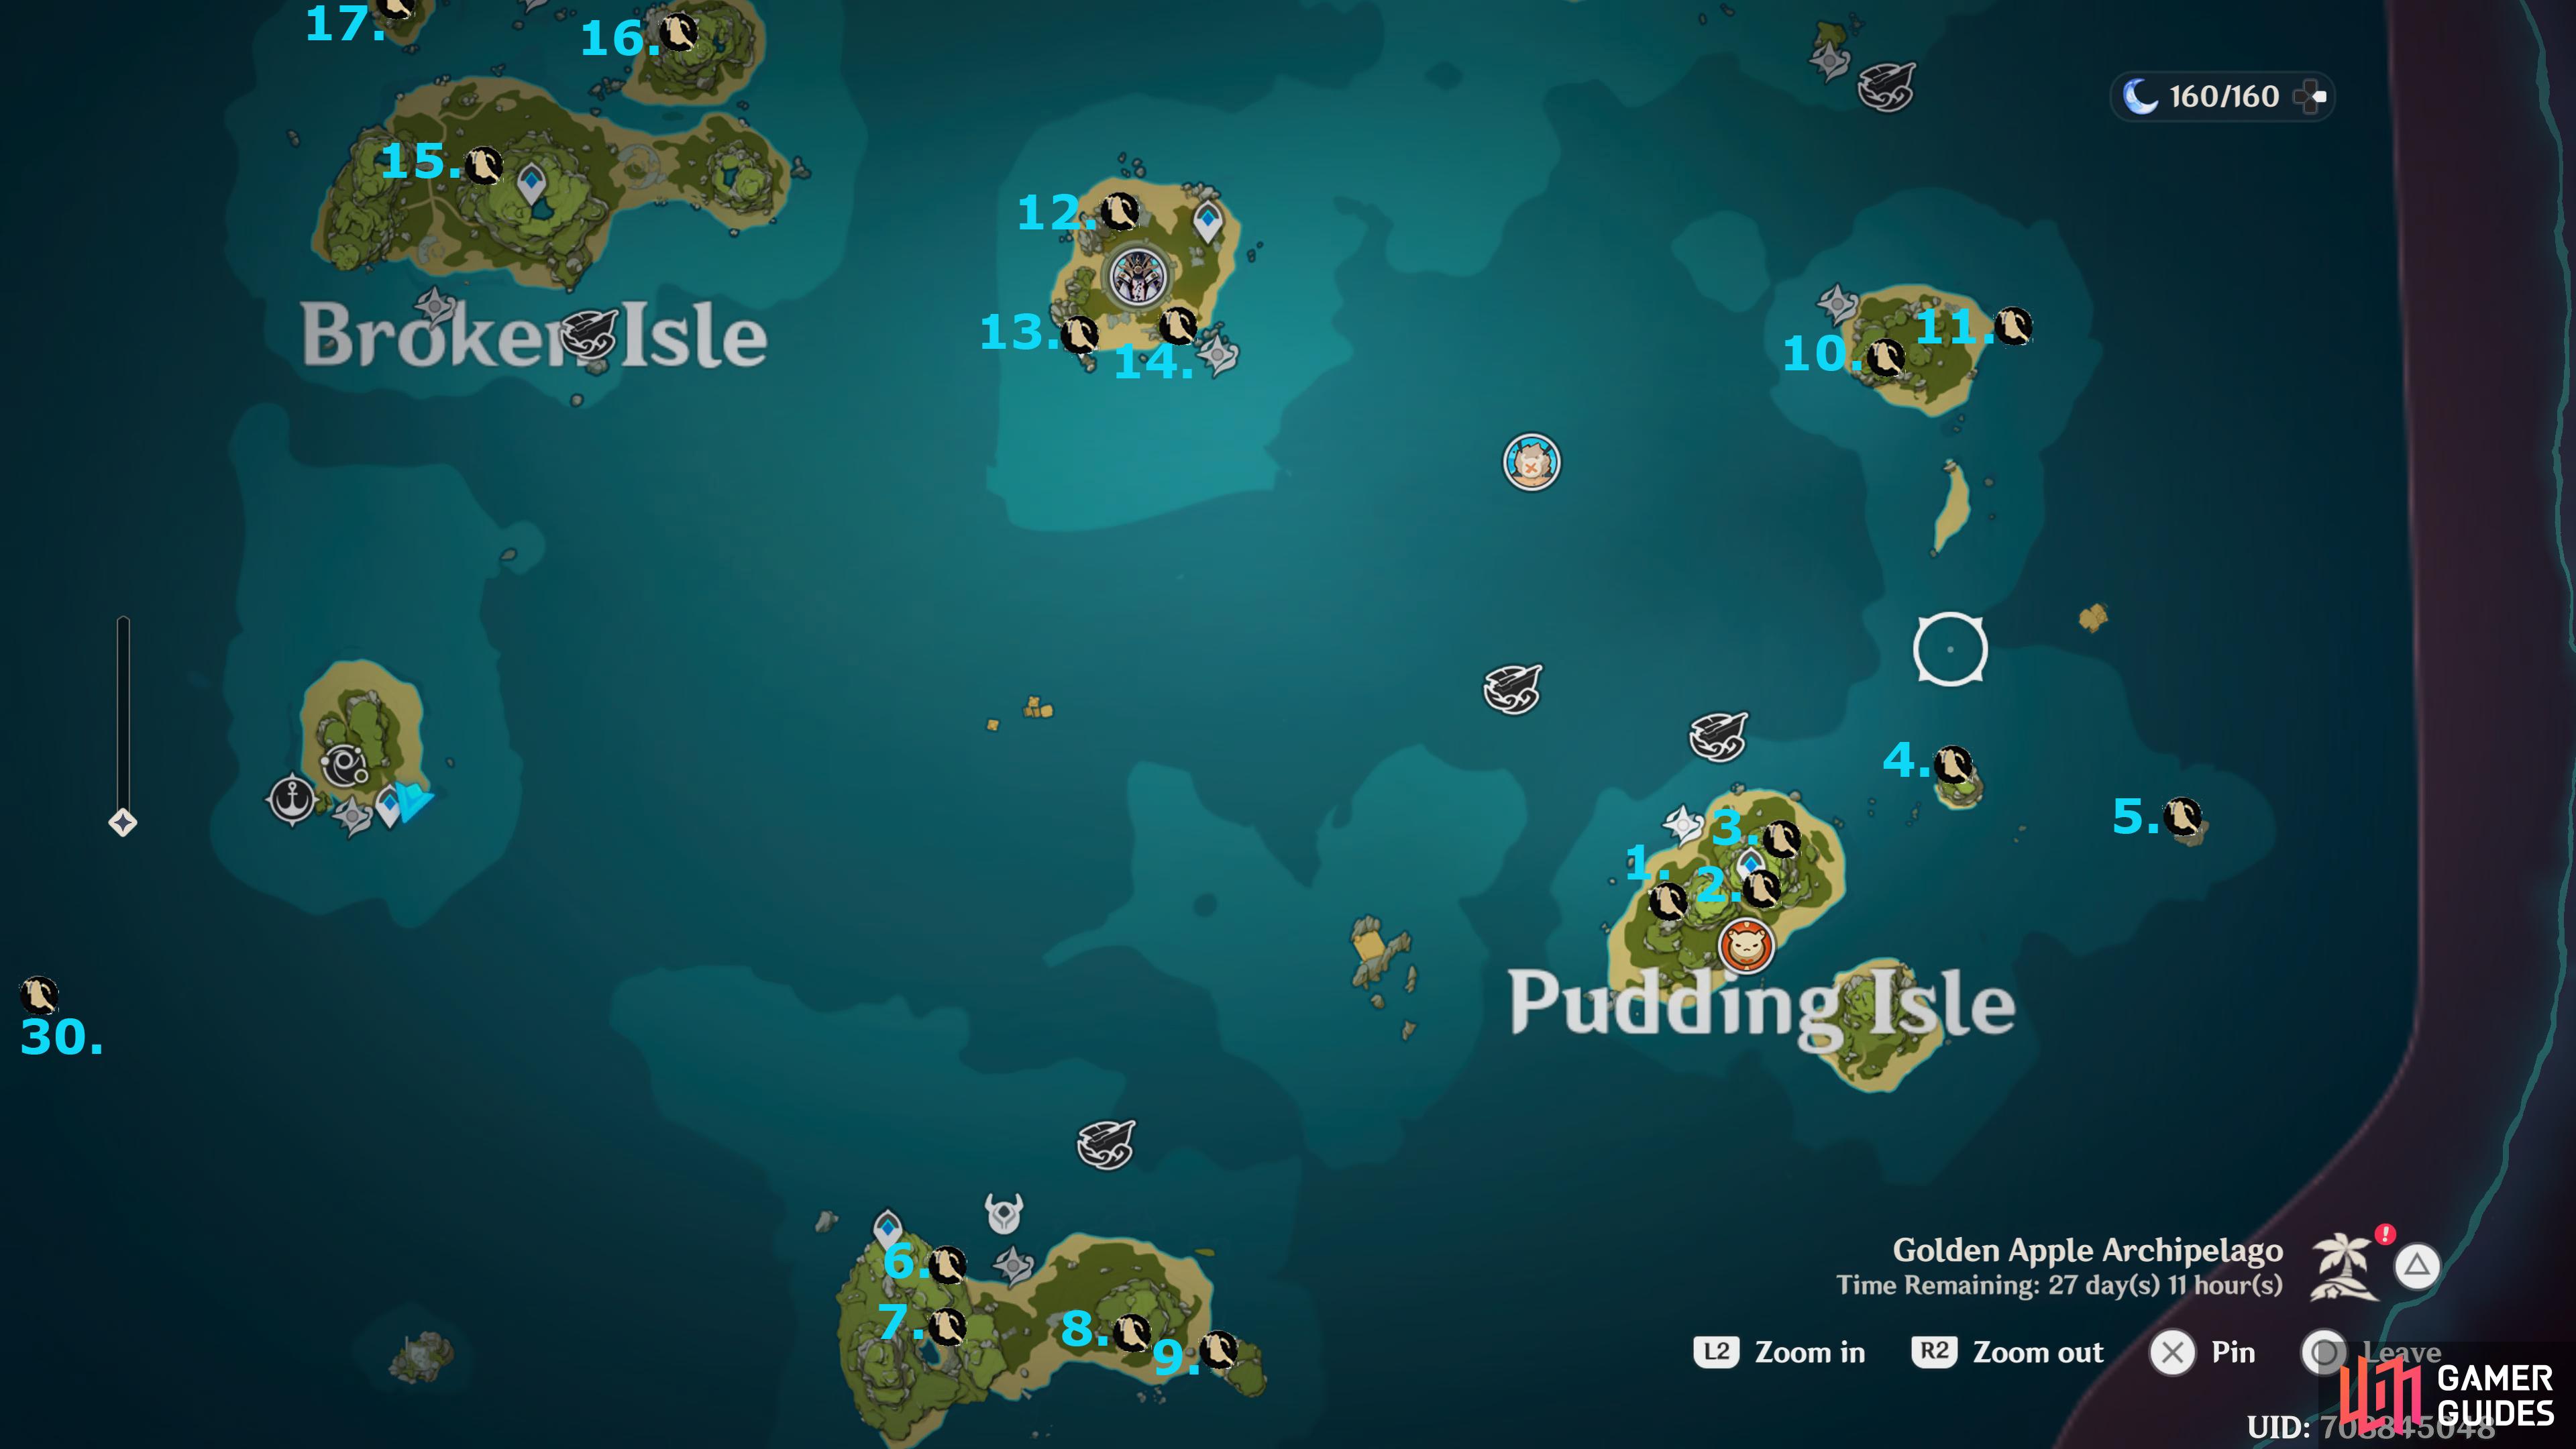 Here you'll find the conch locations on the bottom of the map